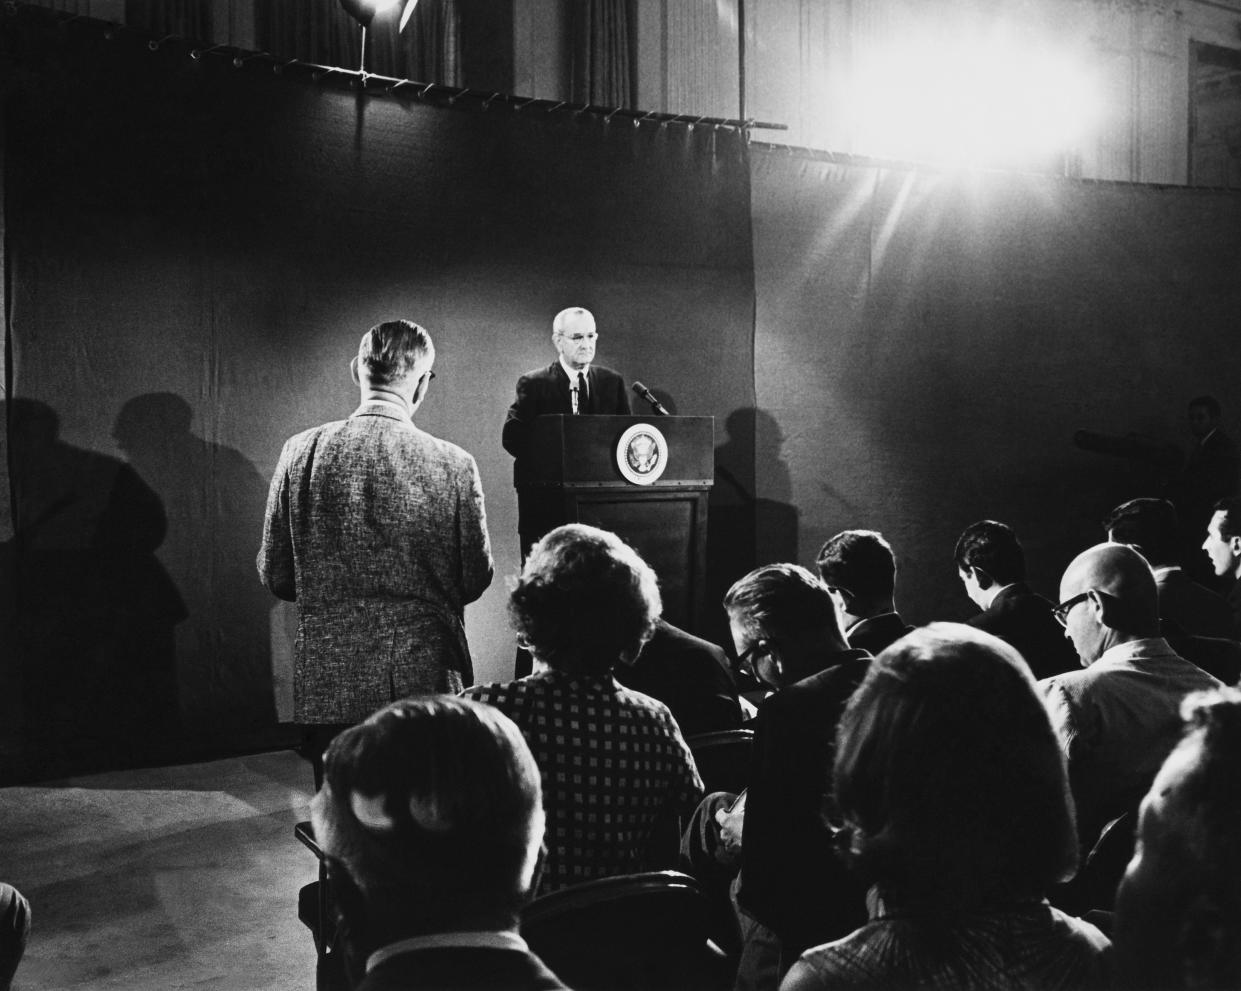 UNITED STATES - JANUARY 01:  Lyndon Johnson, President Of The United States During A Press Conference  (Photo by Keystone-France/Gamma-Keystone via Getty Images)